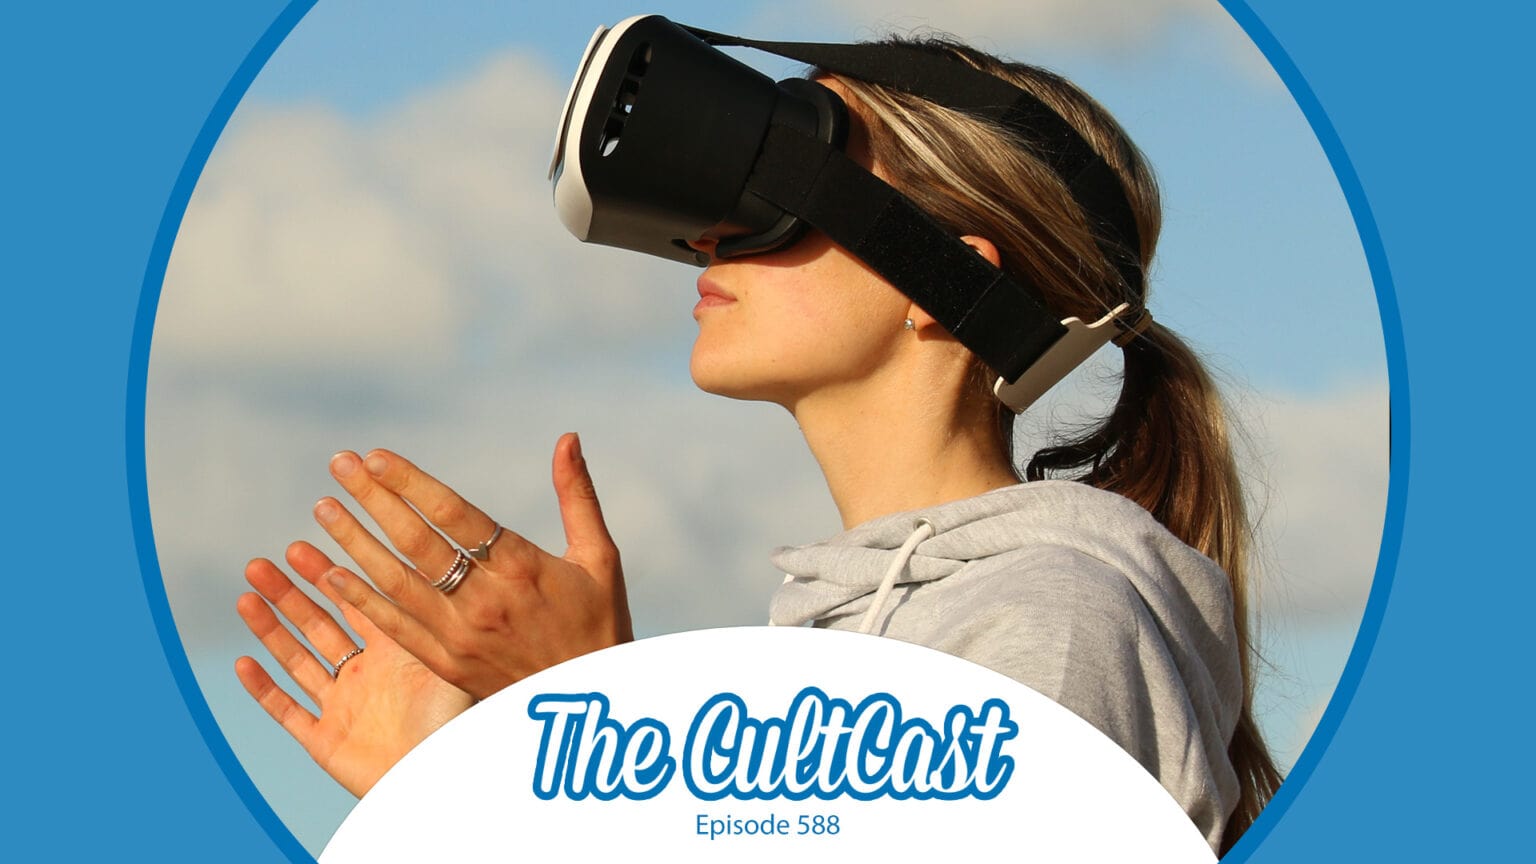 A woman wearing a VR headset outside, plus The CultCast logo.